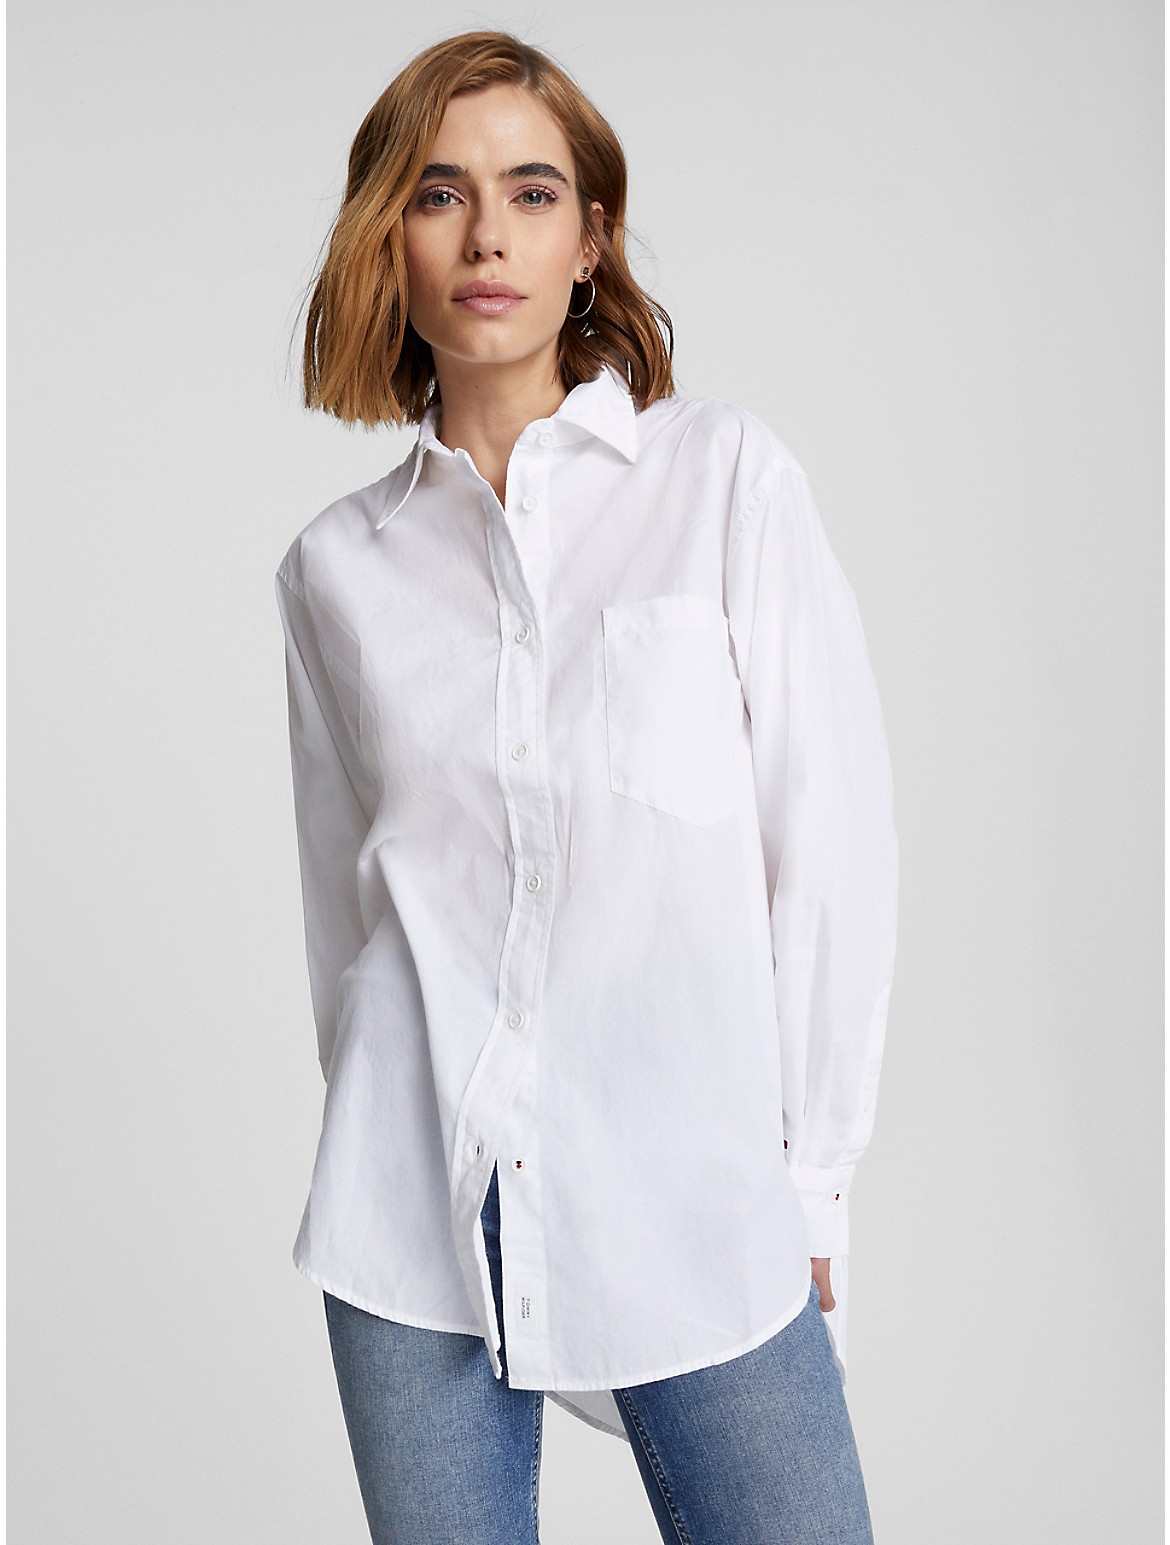 TOMMY HILFIGER Shirts for ModeSens Women 